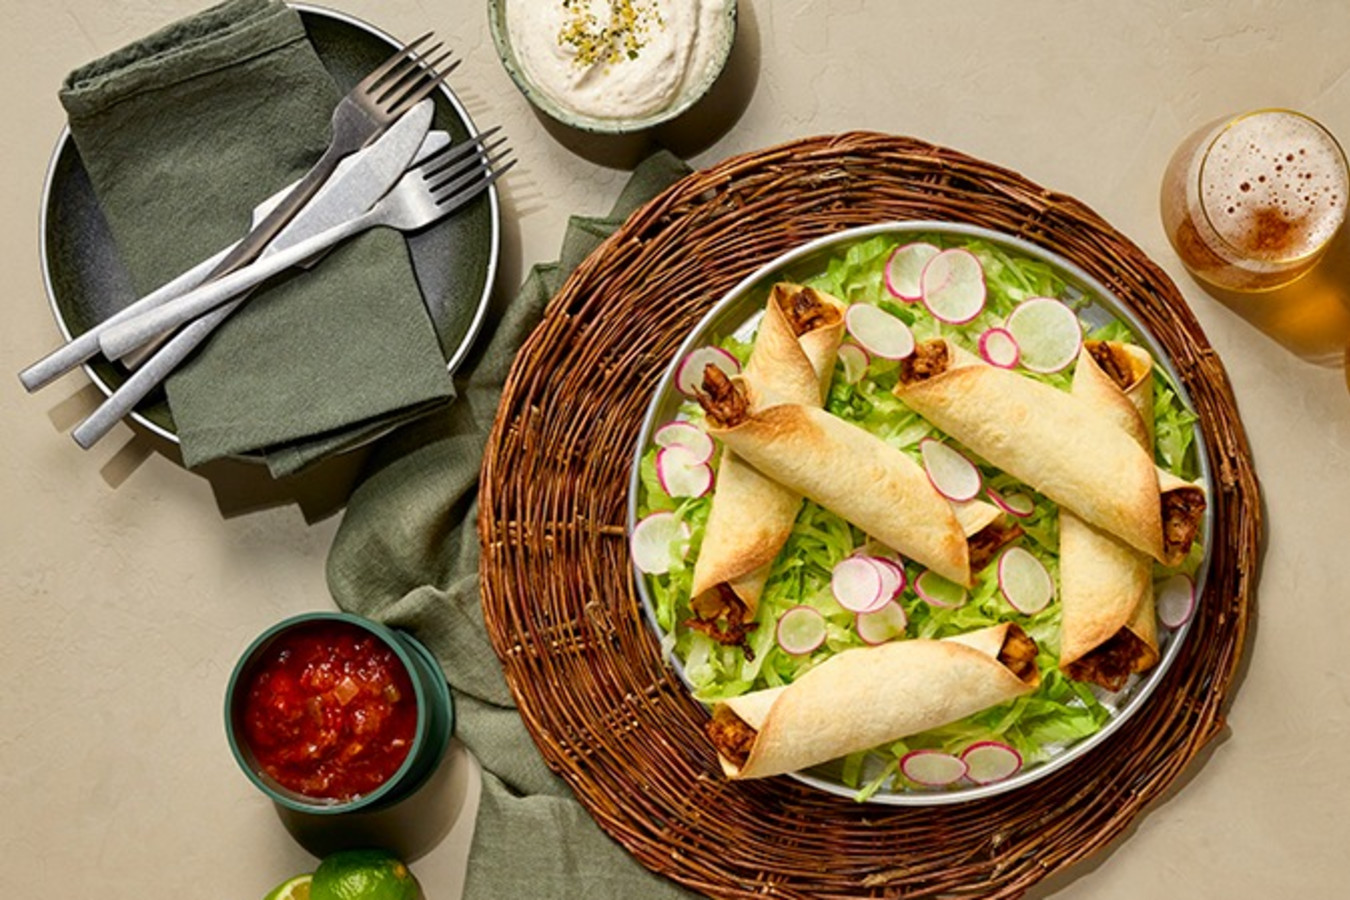 BBQ Chicken Taquitos with Ranch Dip